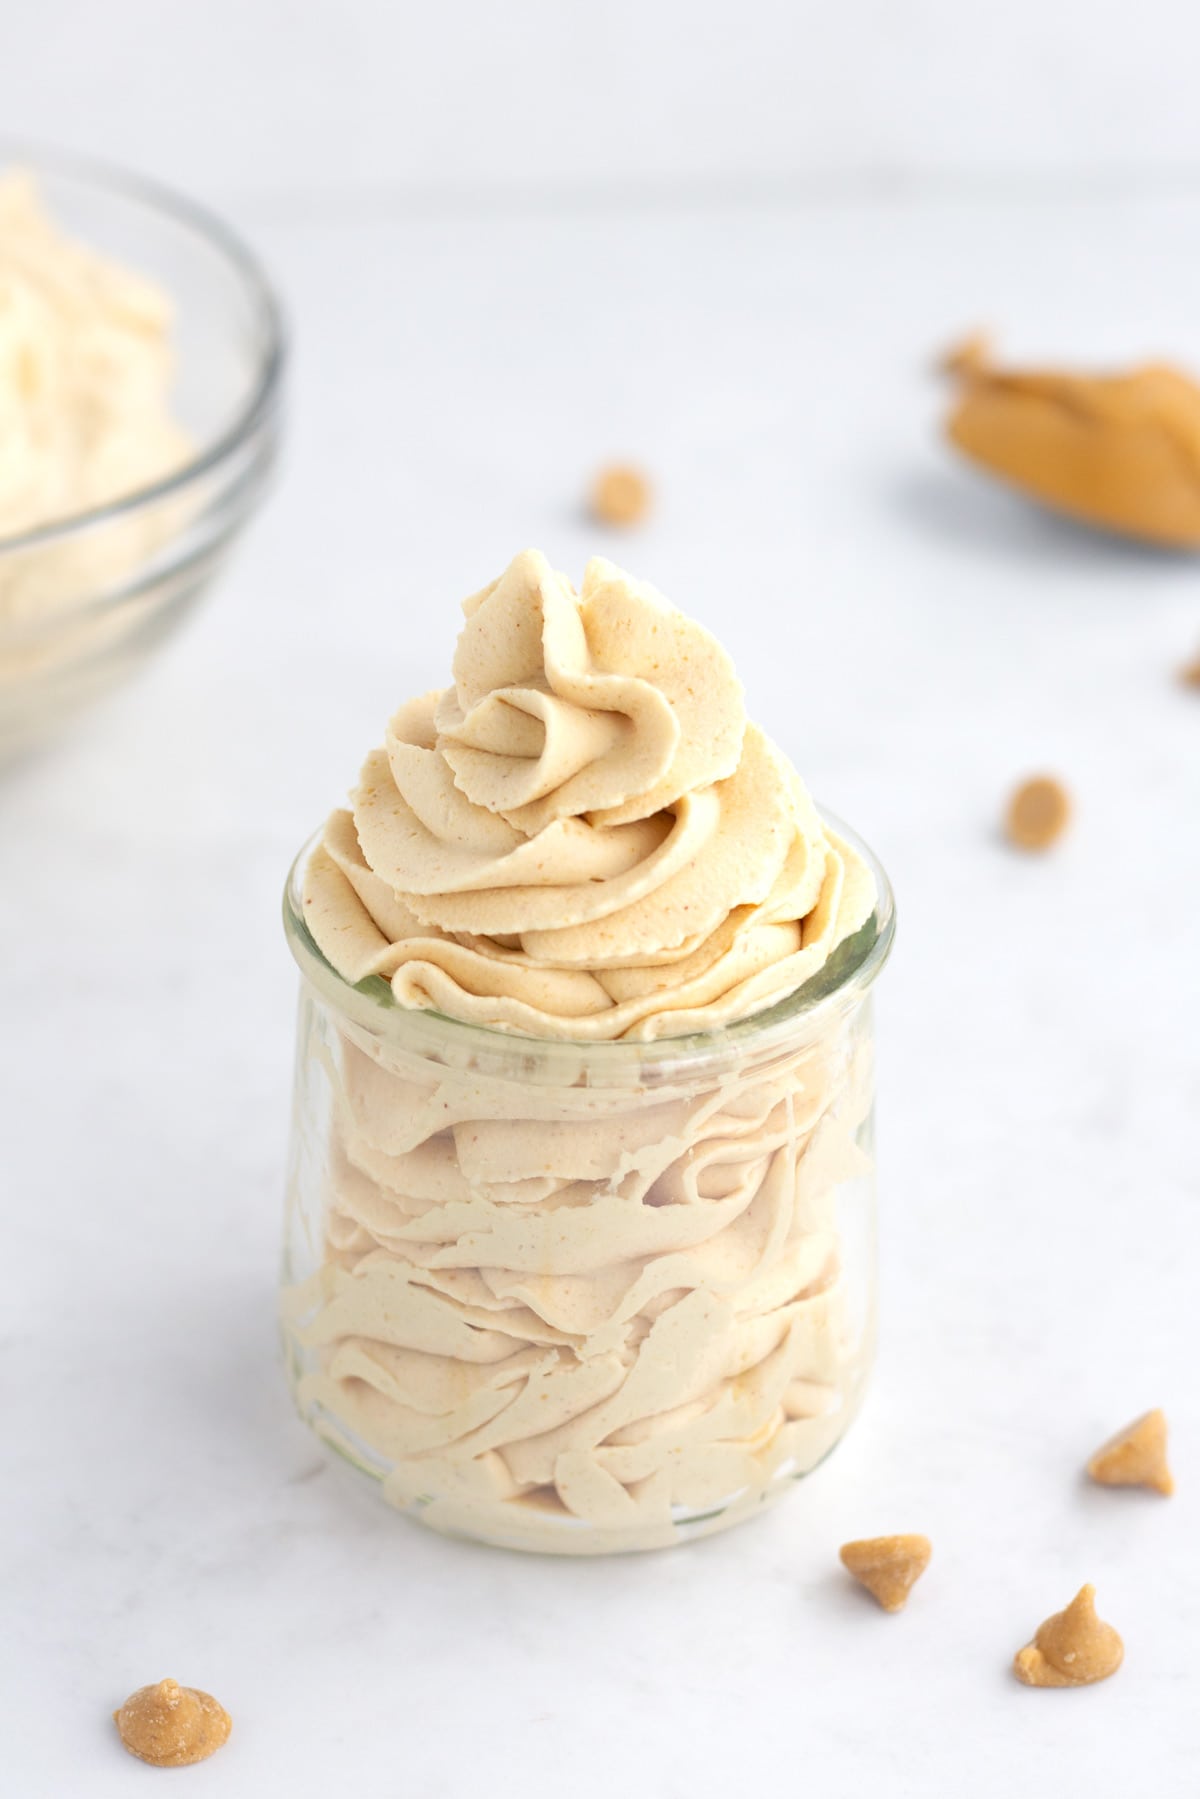 Peanut butter whipped cream piped into a glass jar with peanut butter chips, a spoon of peanut butter, and bowl of whipped cream in the background.